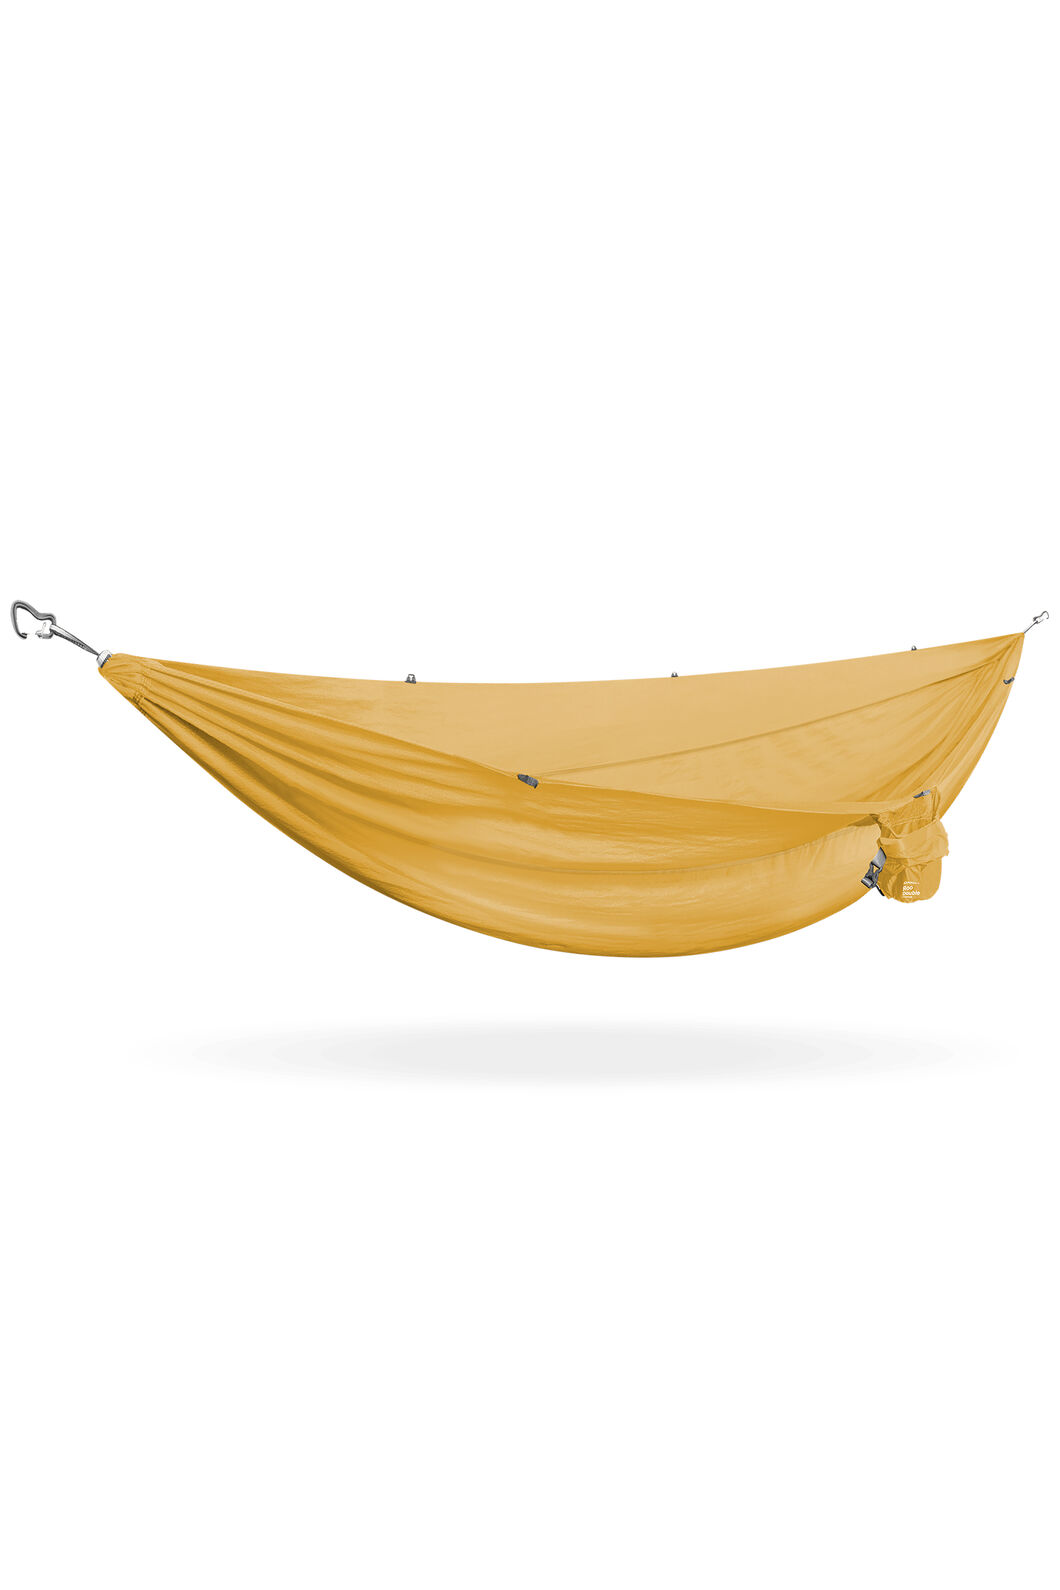 Kammok Roo Double Camping Hammock, Sunflower Gold, hi-res